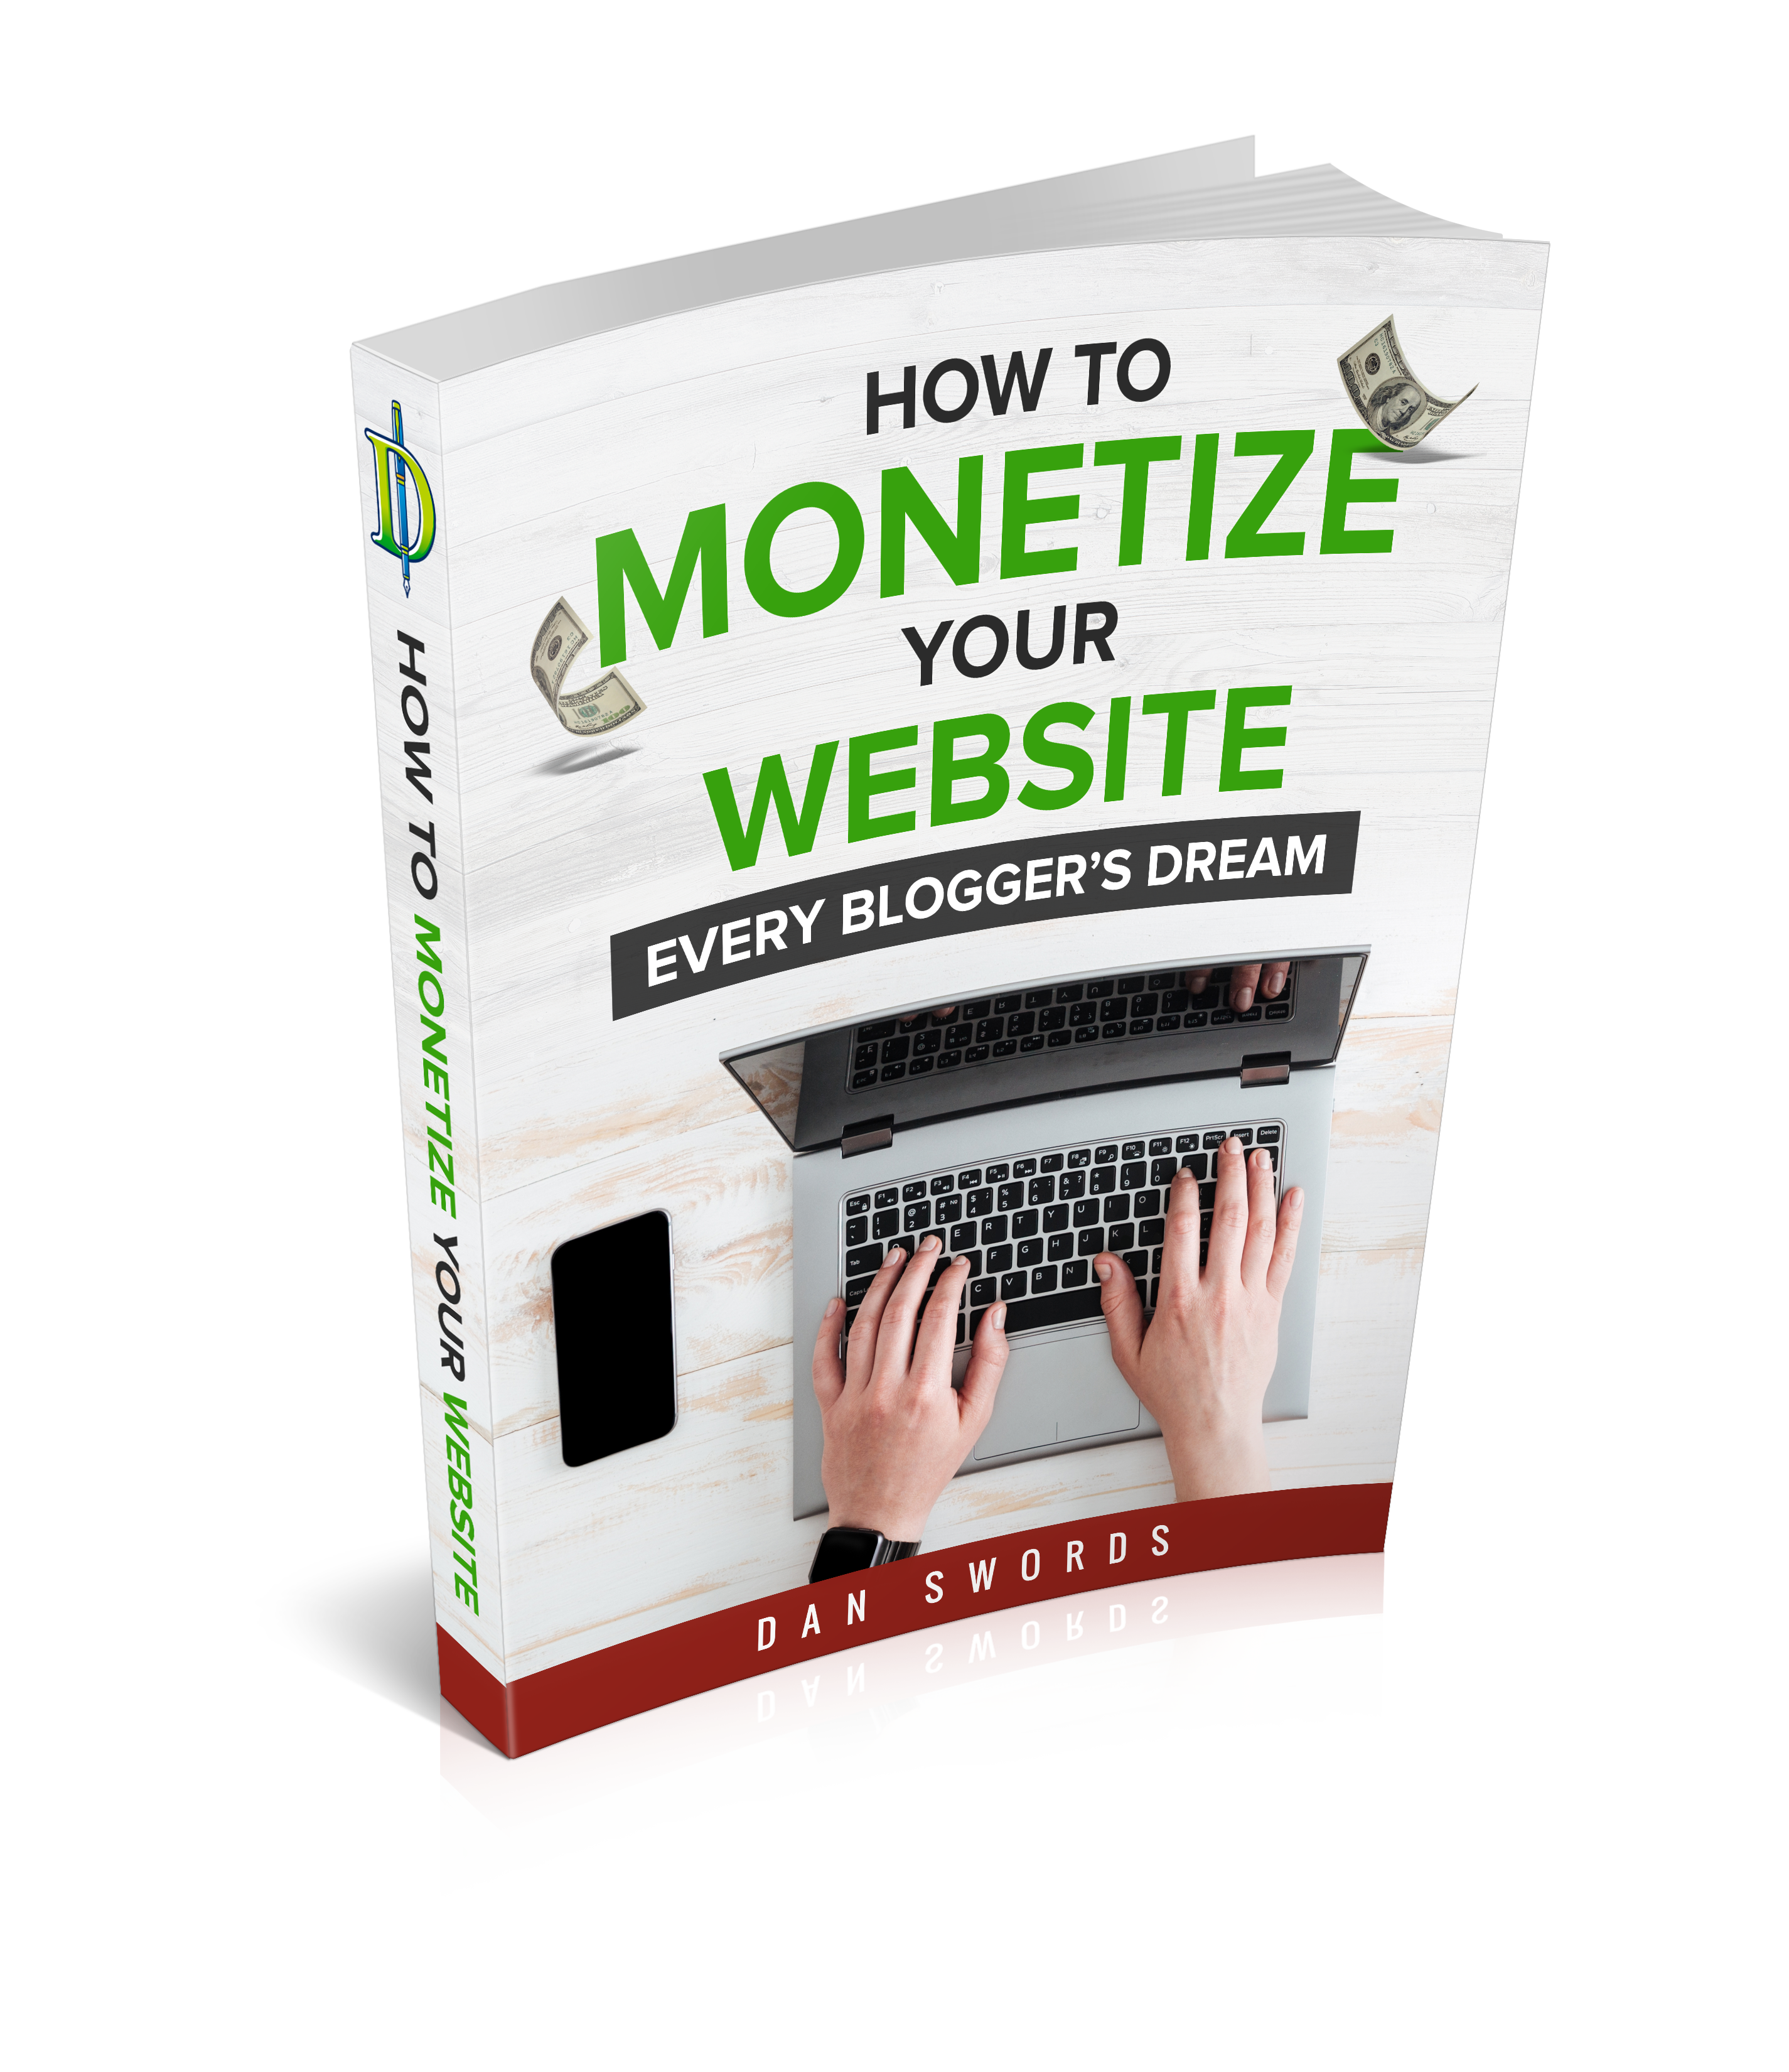 How to Monitize Your Website, Every Blogger's Dream